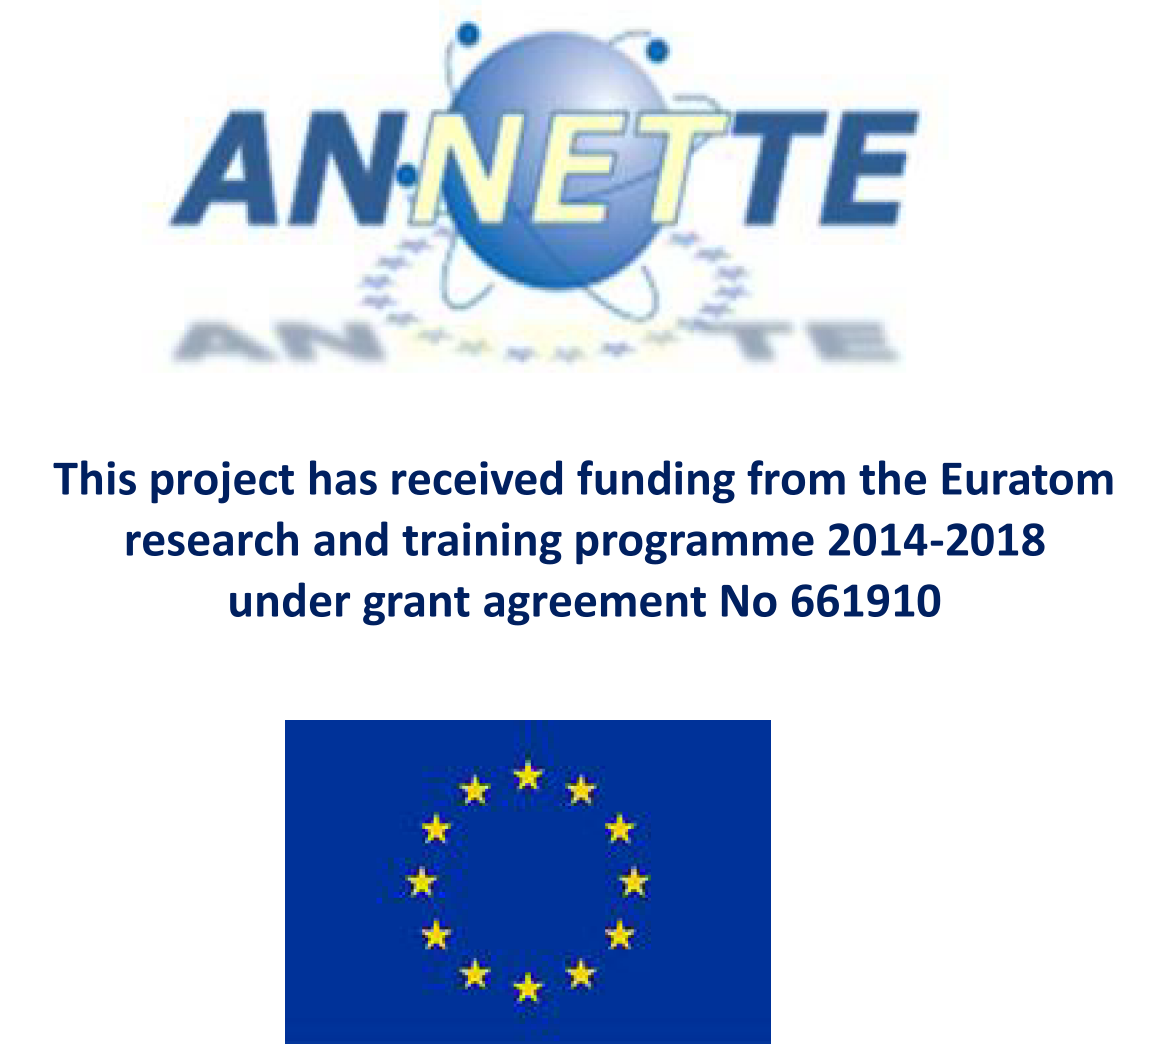 ANNETTE and EU Logos